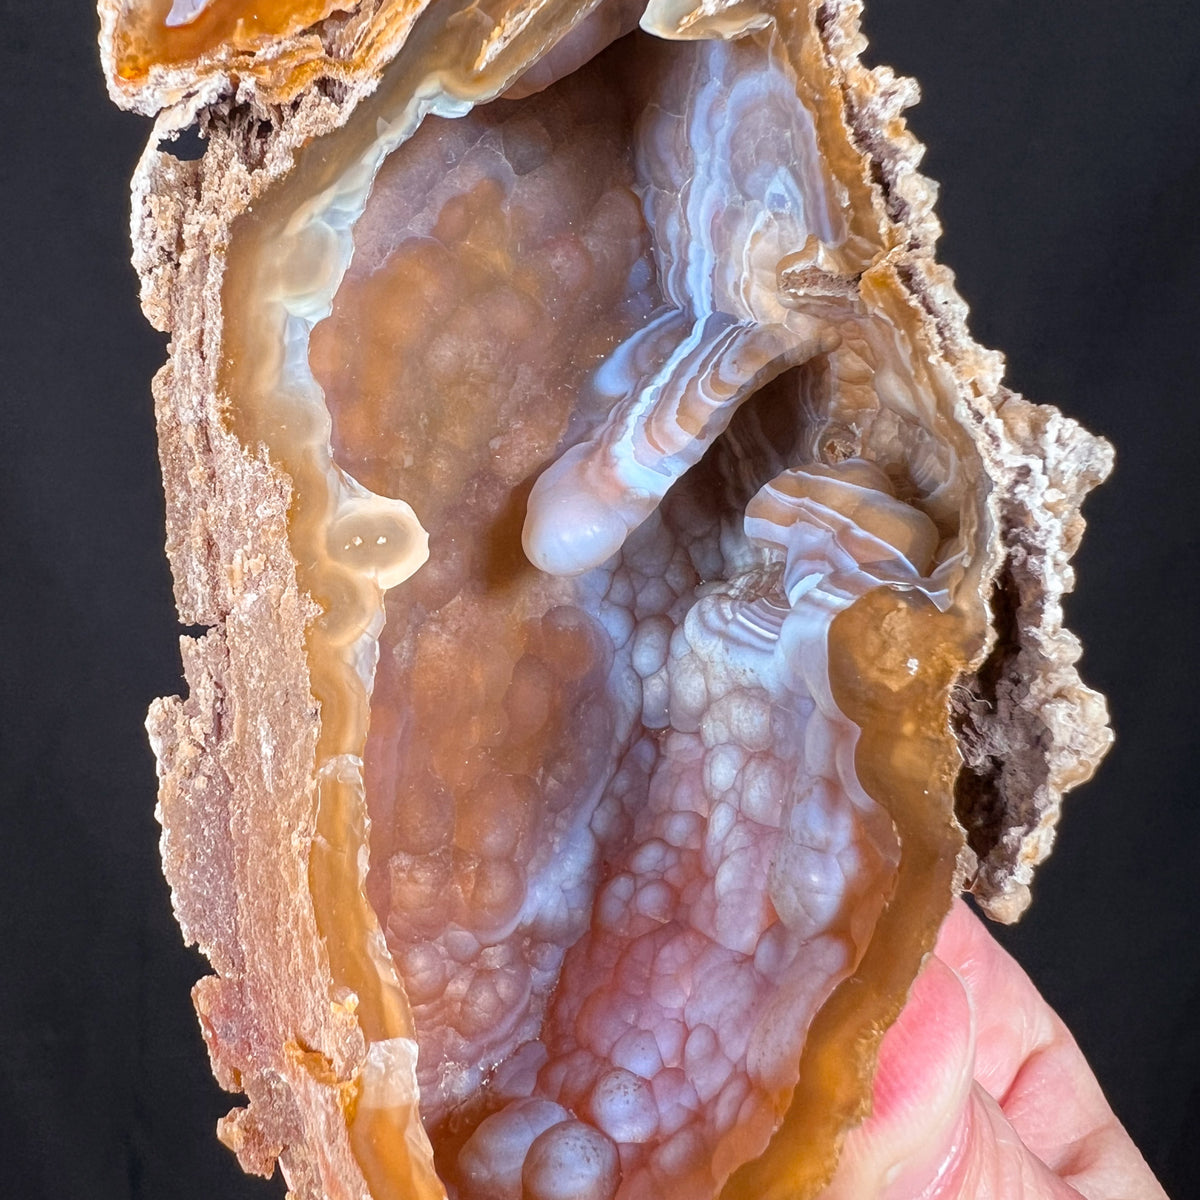 Chalcedony Stalactite inside Fossil Coral